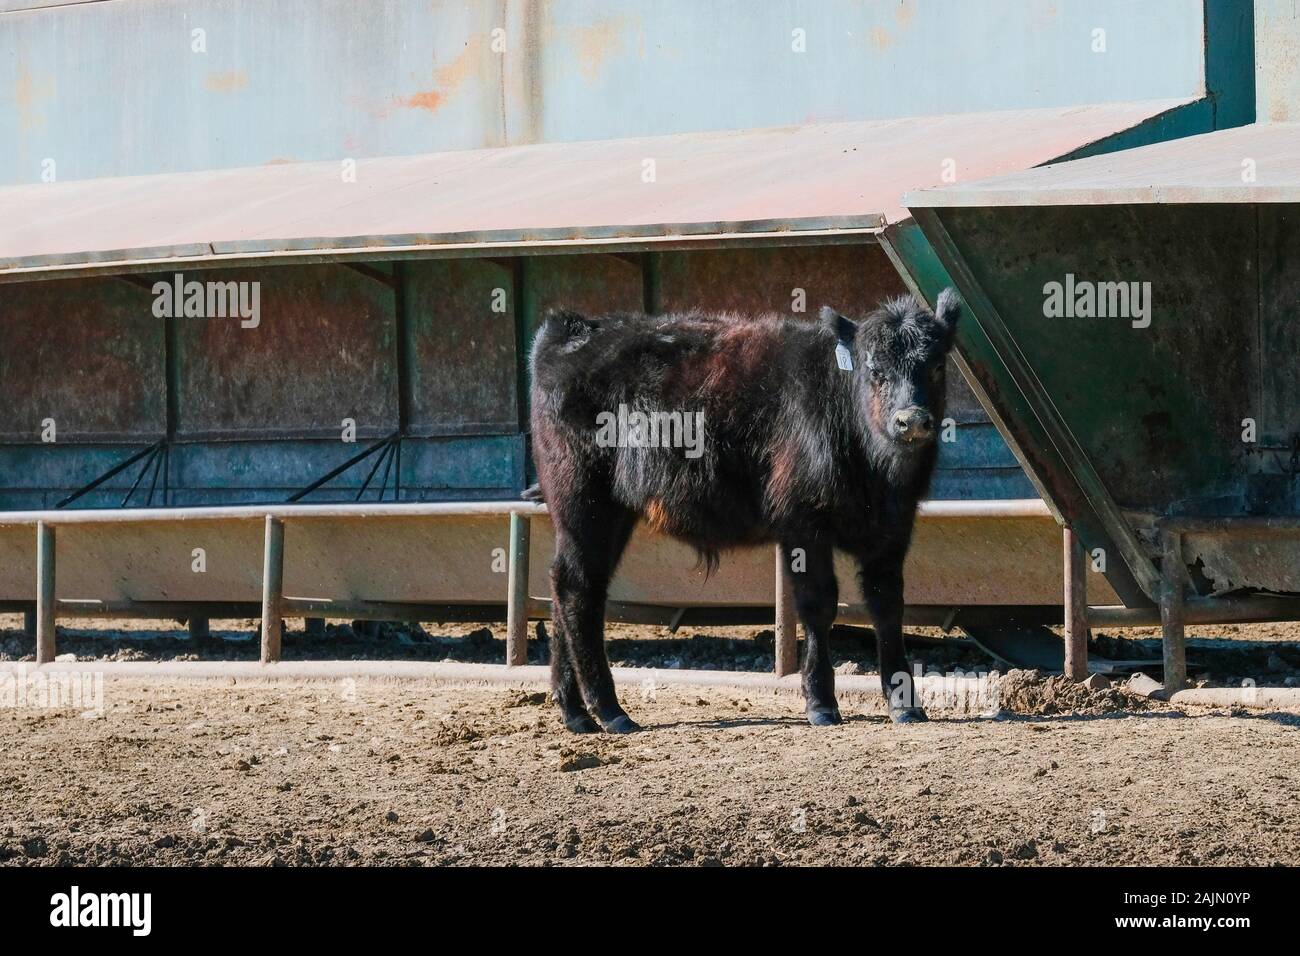 Black steer with ear tag in front of cattle feeder on a large central Texas cattle farm operation. Stock Photo